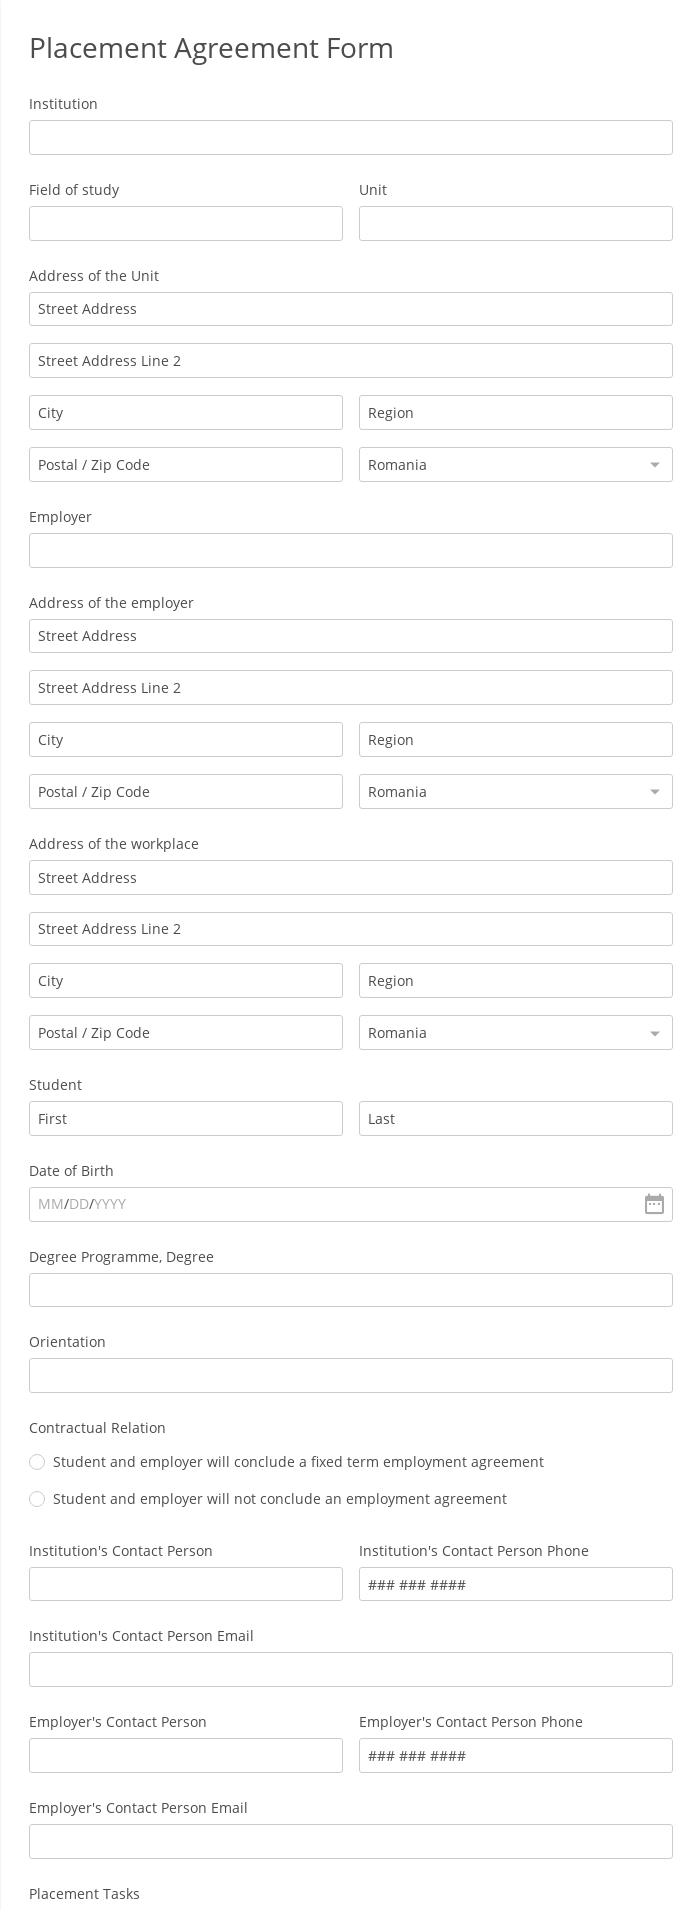 Placement Agreement Form Template  22 Form Builder With workplace mediation agreement template